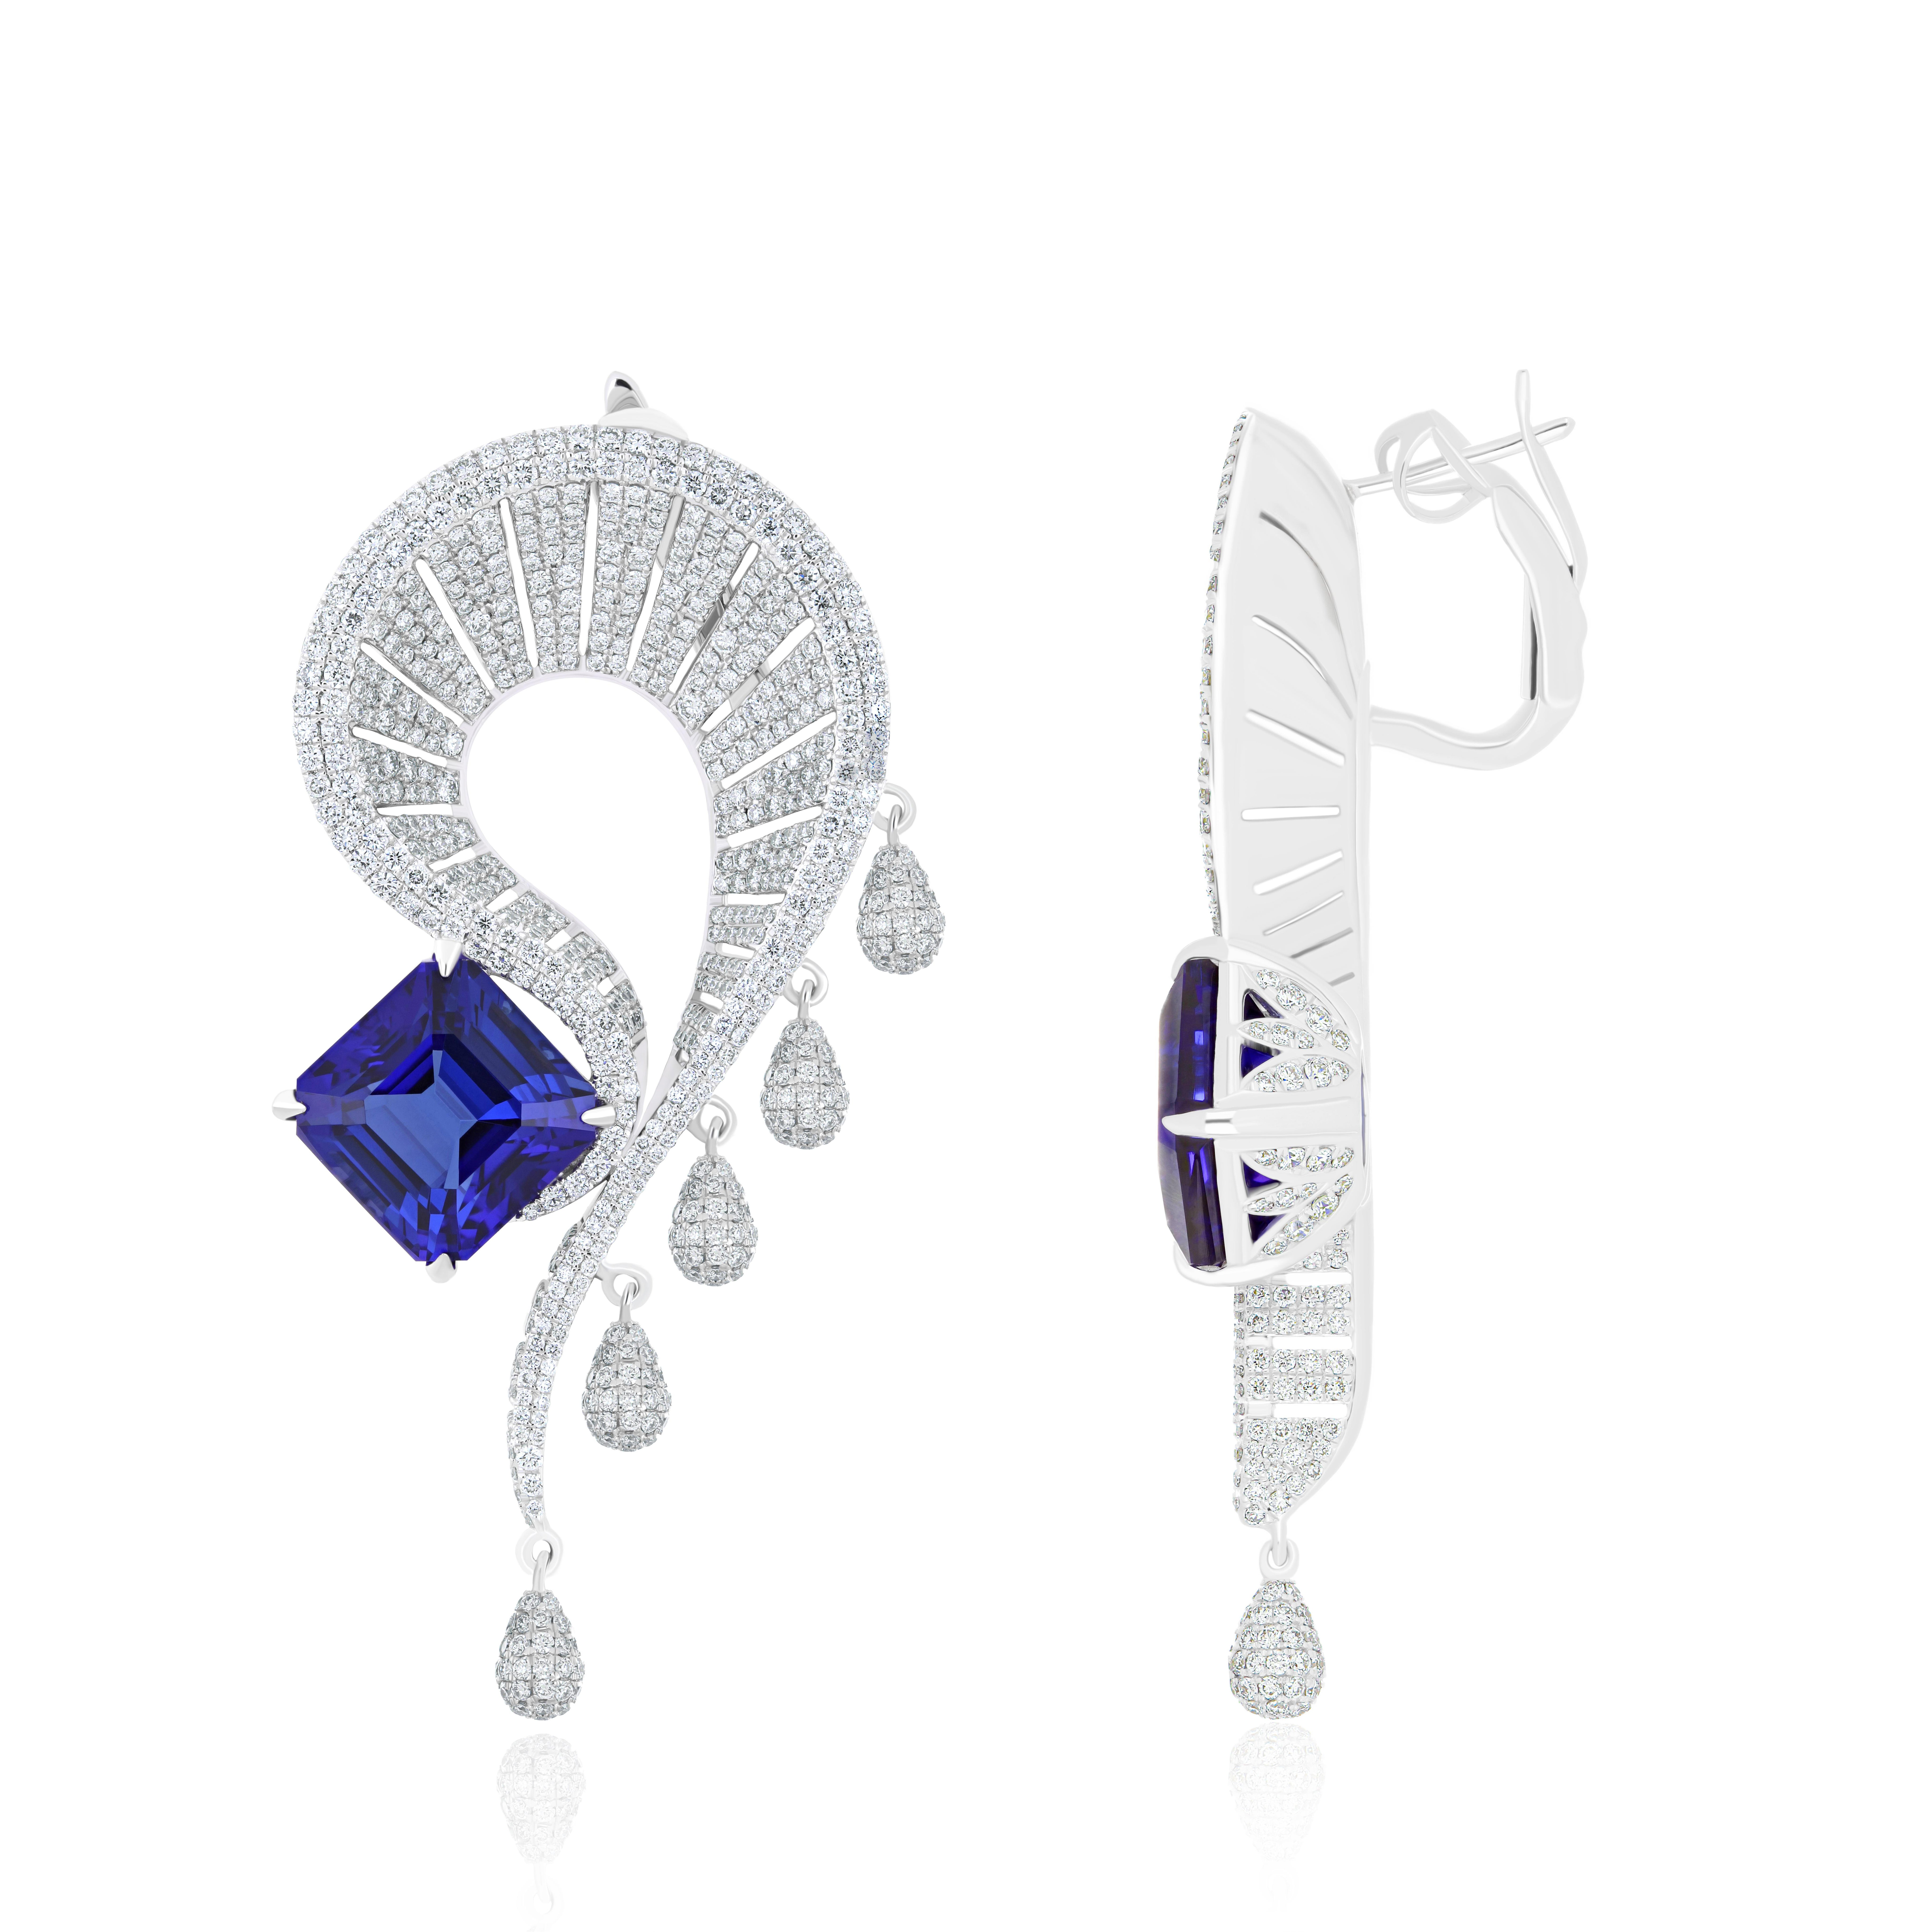 Elegant and Exquisitely detailed White Gold Earring, with 19.6 cts. (approx.) Tanzanite cut in Unique Octagon Shape  with micro pave Diamonds, weighing approx. 8.5 cts. (approx.). total carat weight. Beautifully Hand-Crafted Earring in 18 Karat